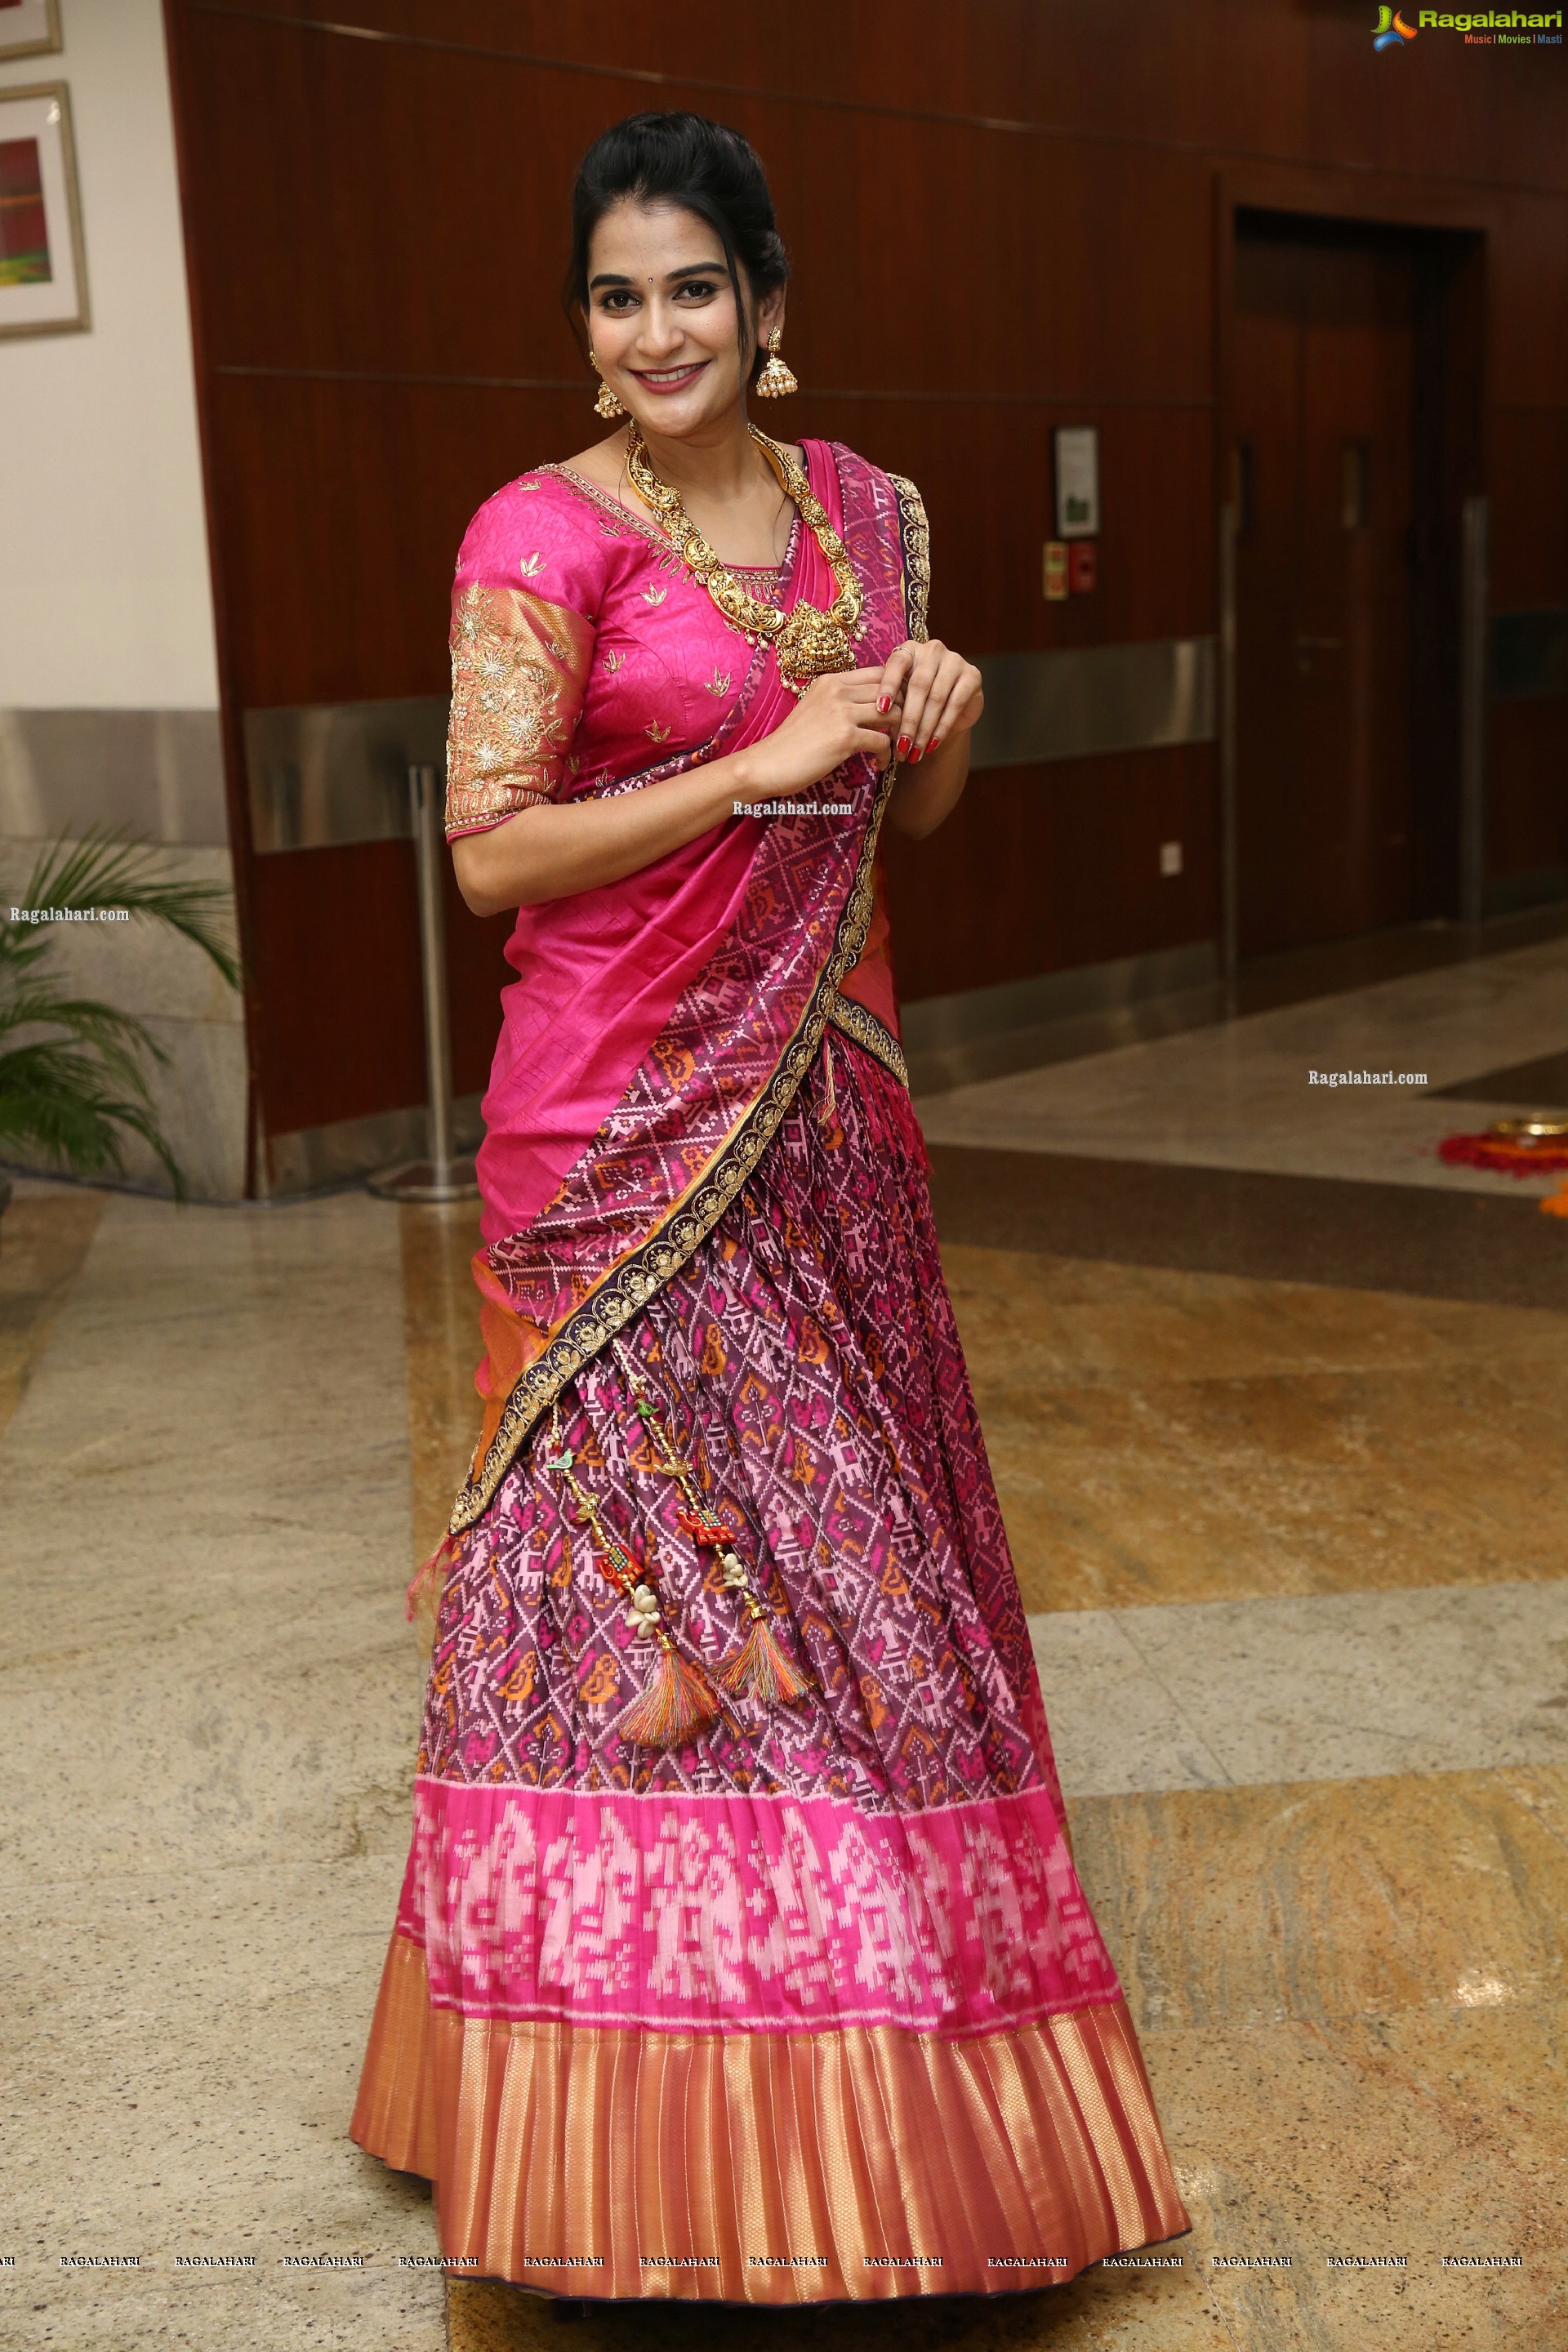 Jenny Honey in Pink Lehenga and Stunning Ornaments, HD Photo Gallery